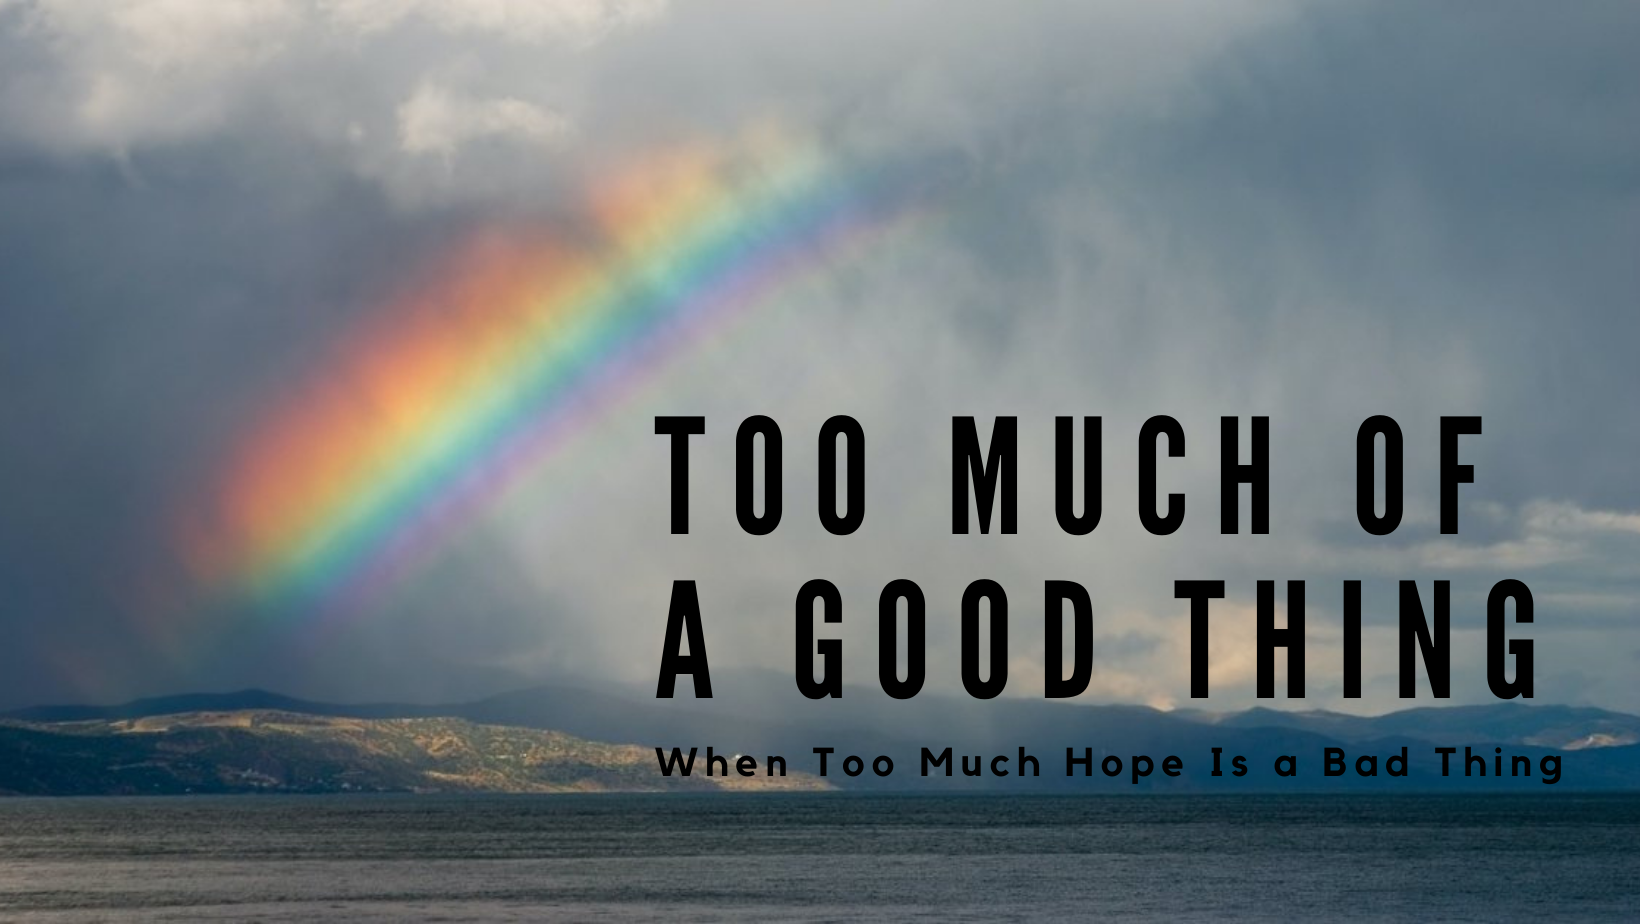 Too Much of a Good Thing: When Too Much Hope Is a Bad Thing